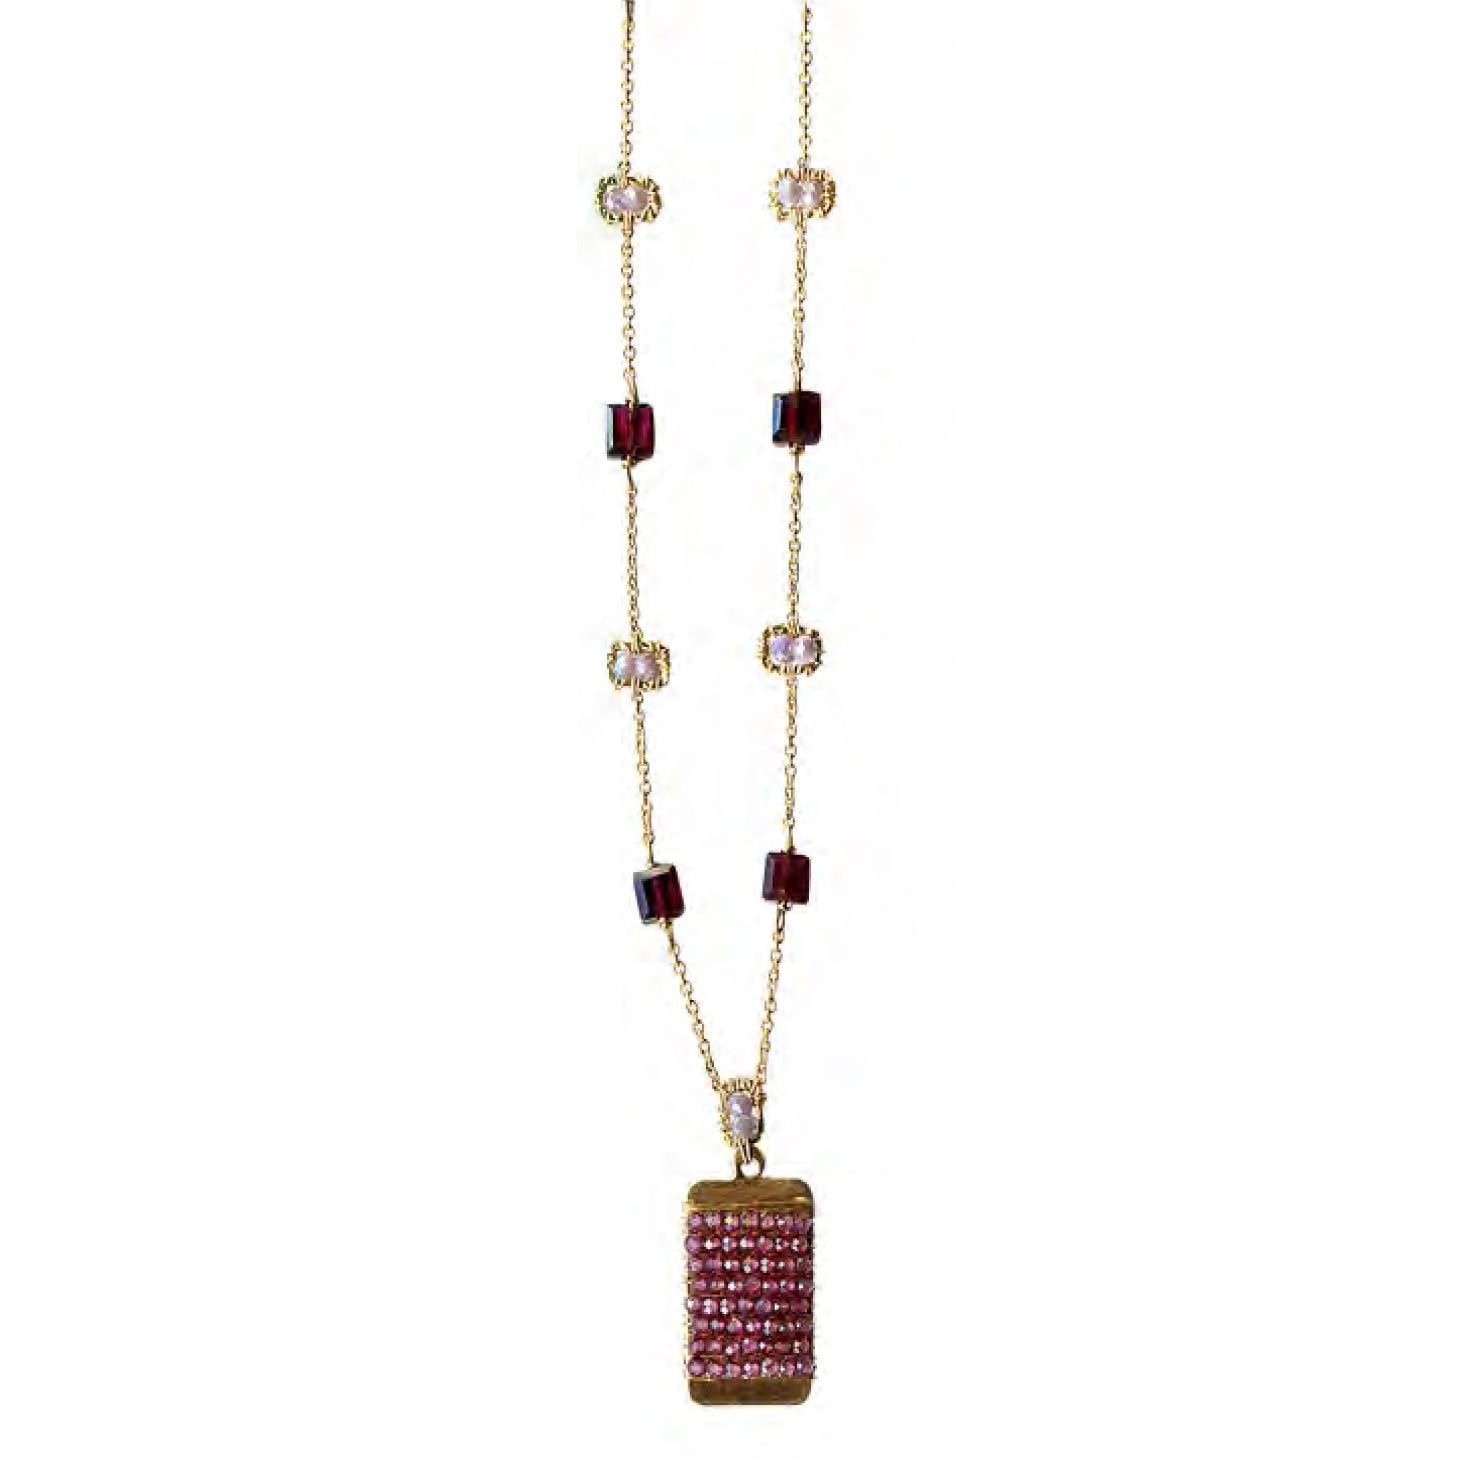 Michelle Pressler Jewelry Necklace 5020, Garnet and Lavender Moonstone –  Sweetheart Gallery, LLC: Contemporary Craft Gallery, Fine American Craft,  Art, Decor, Handmade Home & Personal Accessories